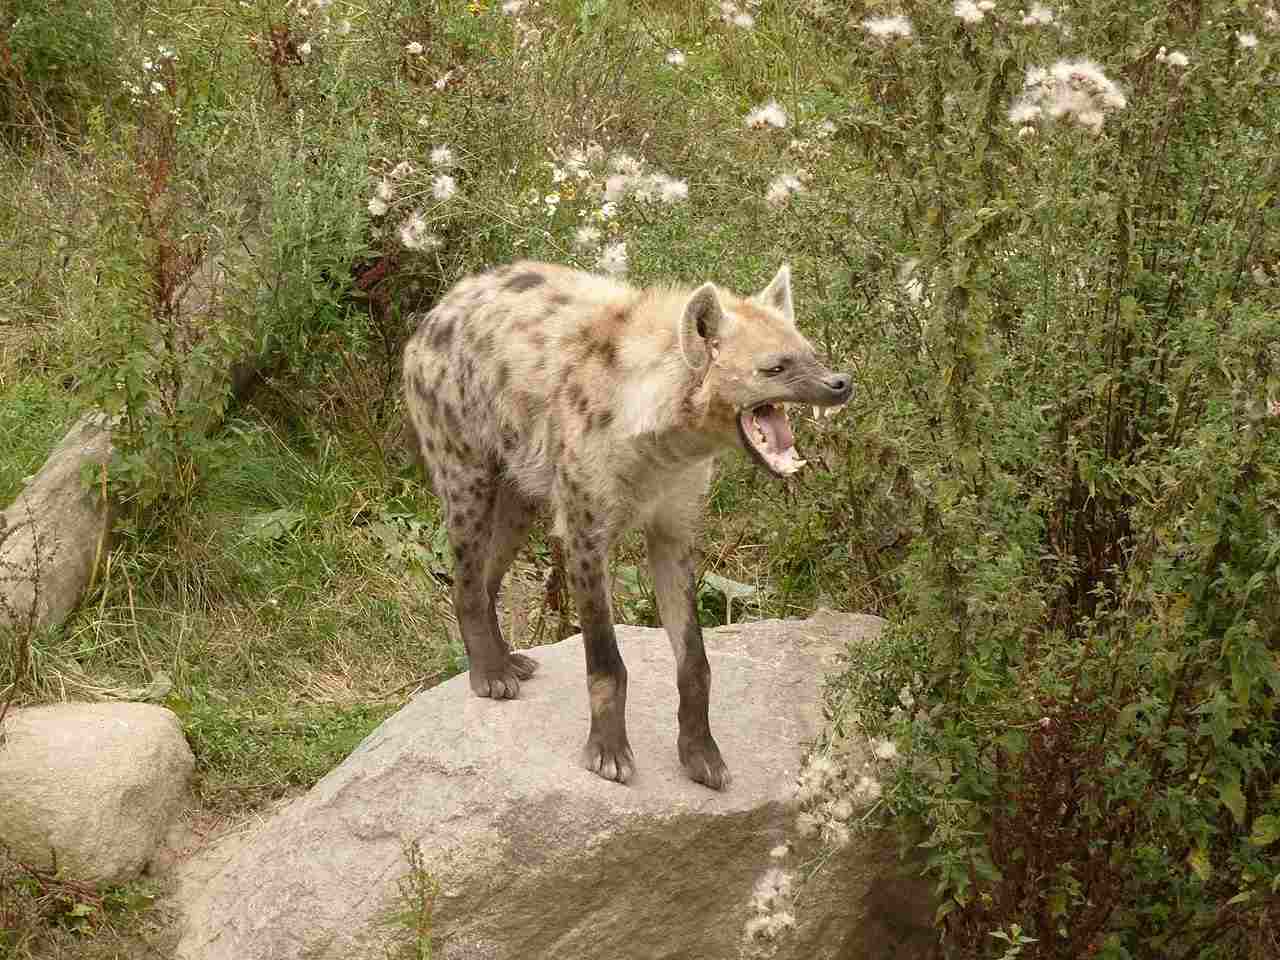 Striped Hyena Vs Spotted Hyena: All Hyena Species are Potentially Dangerous to Humans (Credit: zoofanatic 2012 .CC BY 2.0.)